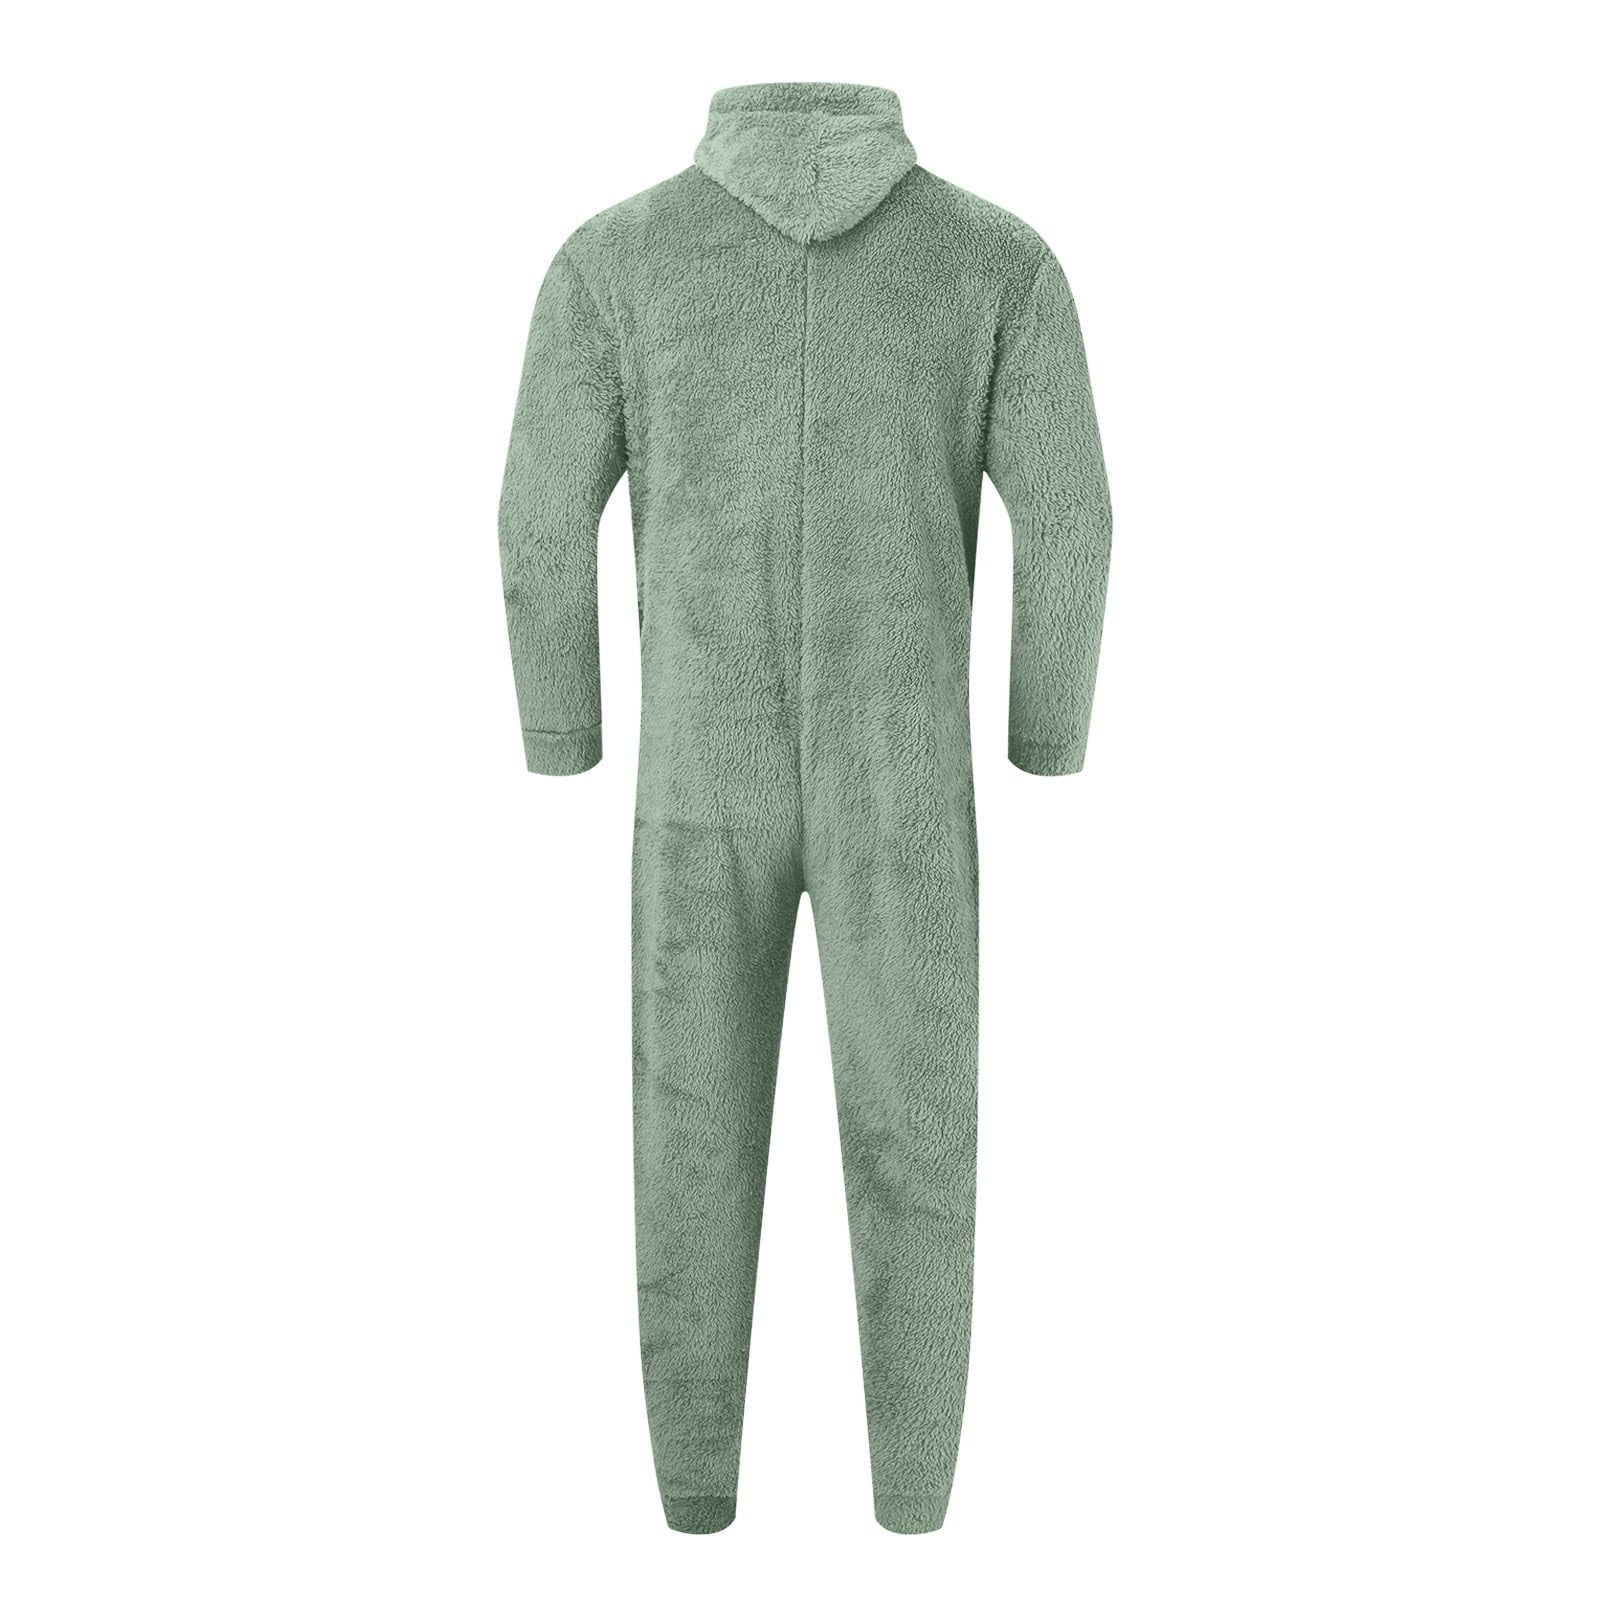 HAPIMO Men's Hooded Jumpsuit Pajamas Sleepwear Sales Holiday Solid Color  Fashion Clearance Long Sleeve Athletic Tops Comfy Daily Soft Fleece Winter